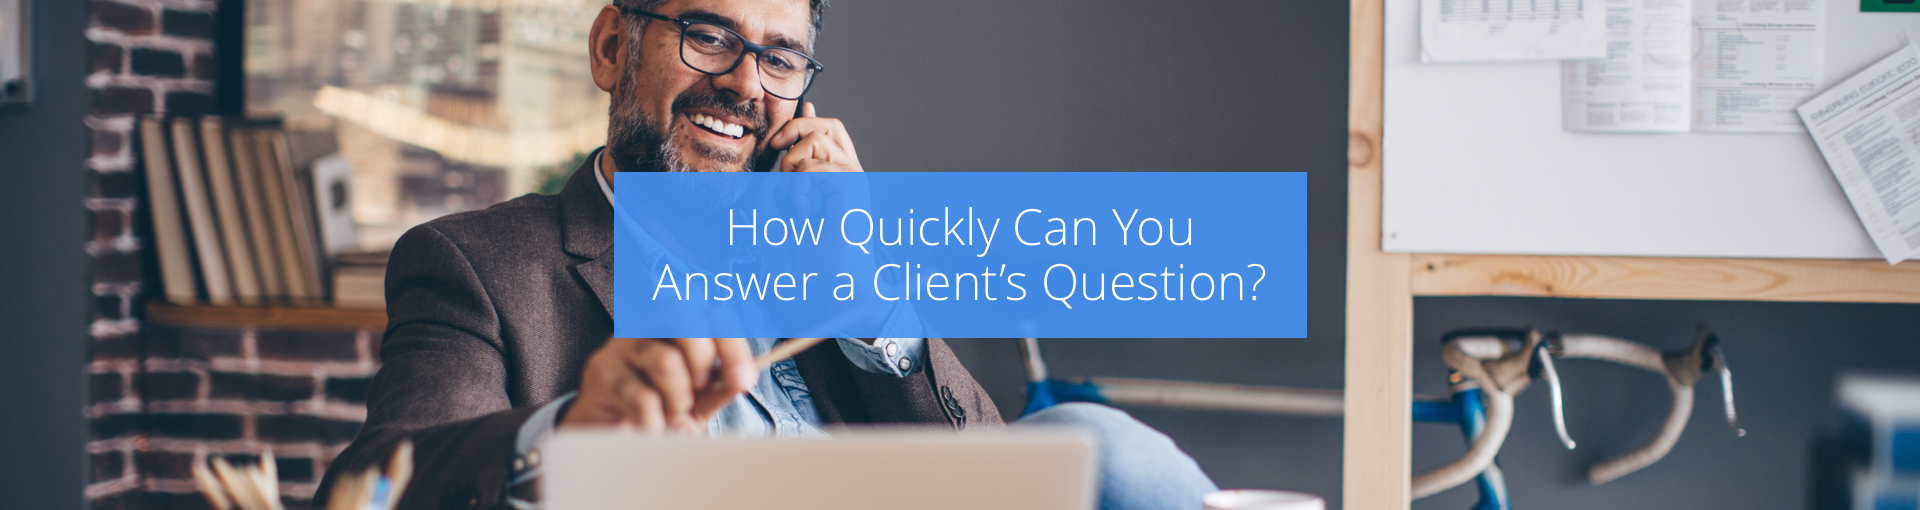 How Quickly Can You Answer a Client’s Question? Featured Image